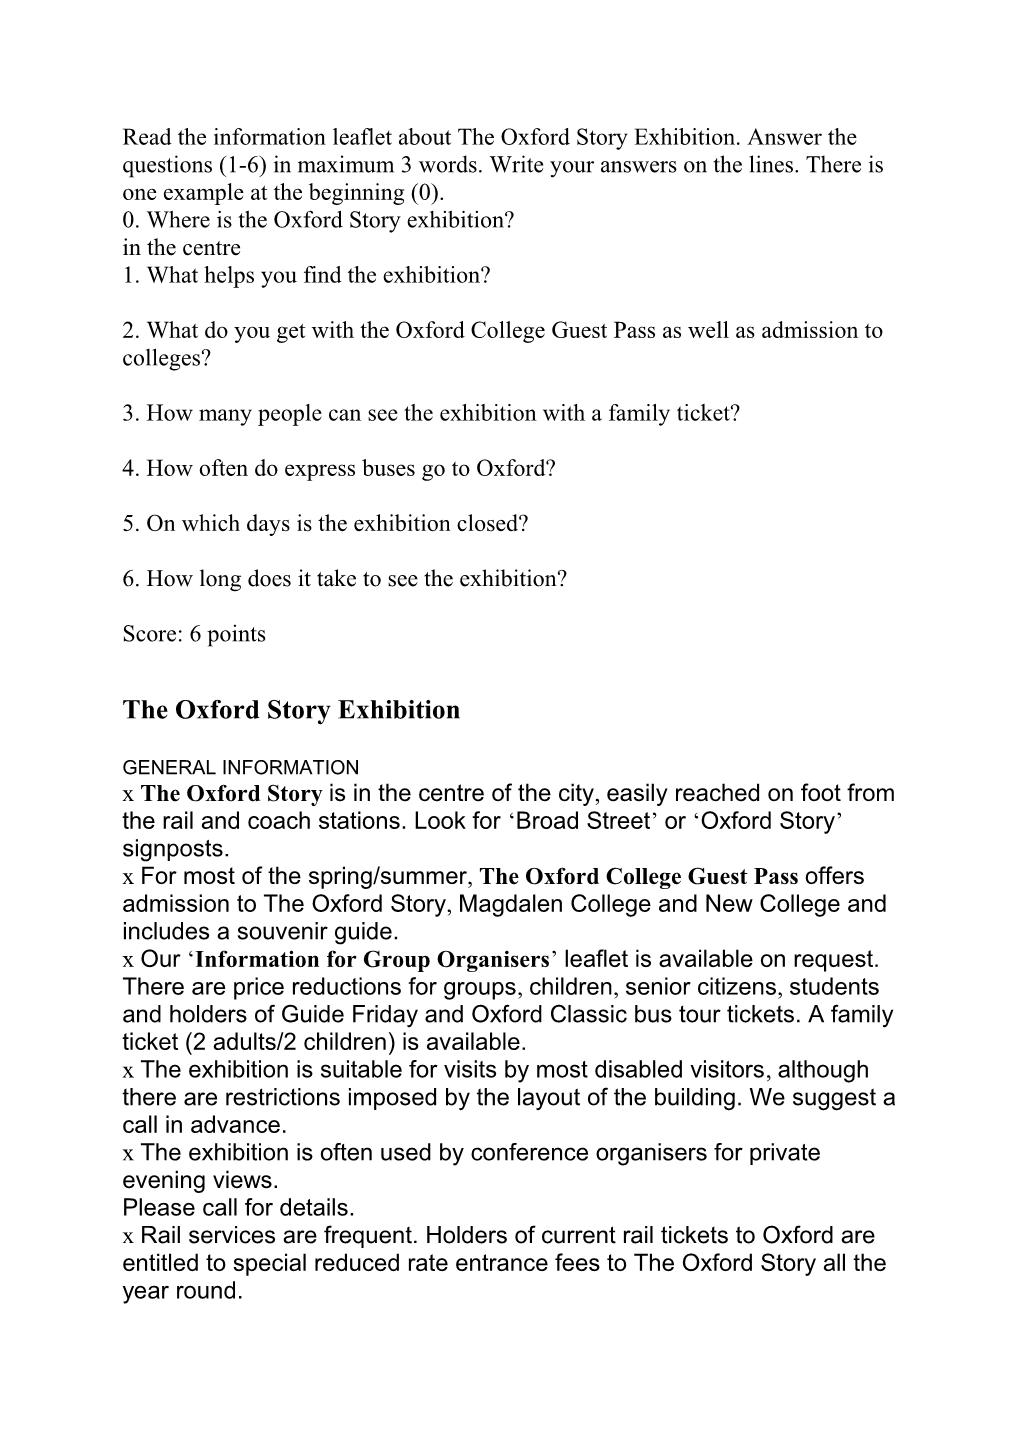 Read the Information Leaflet About the Oxford Story Exhibition